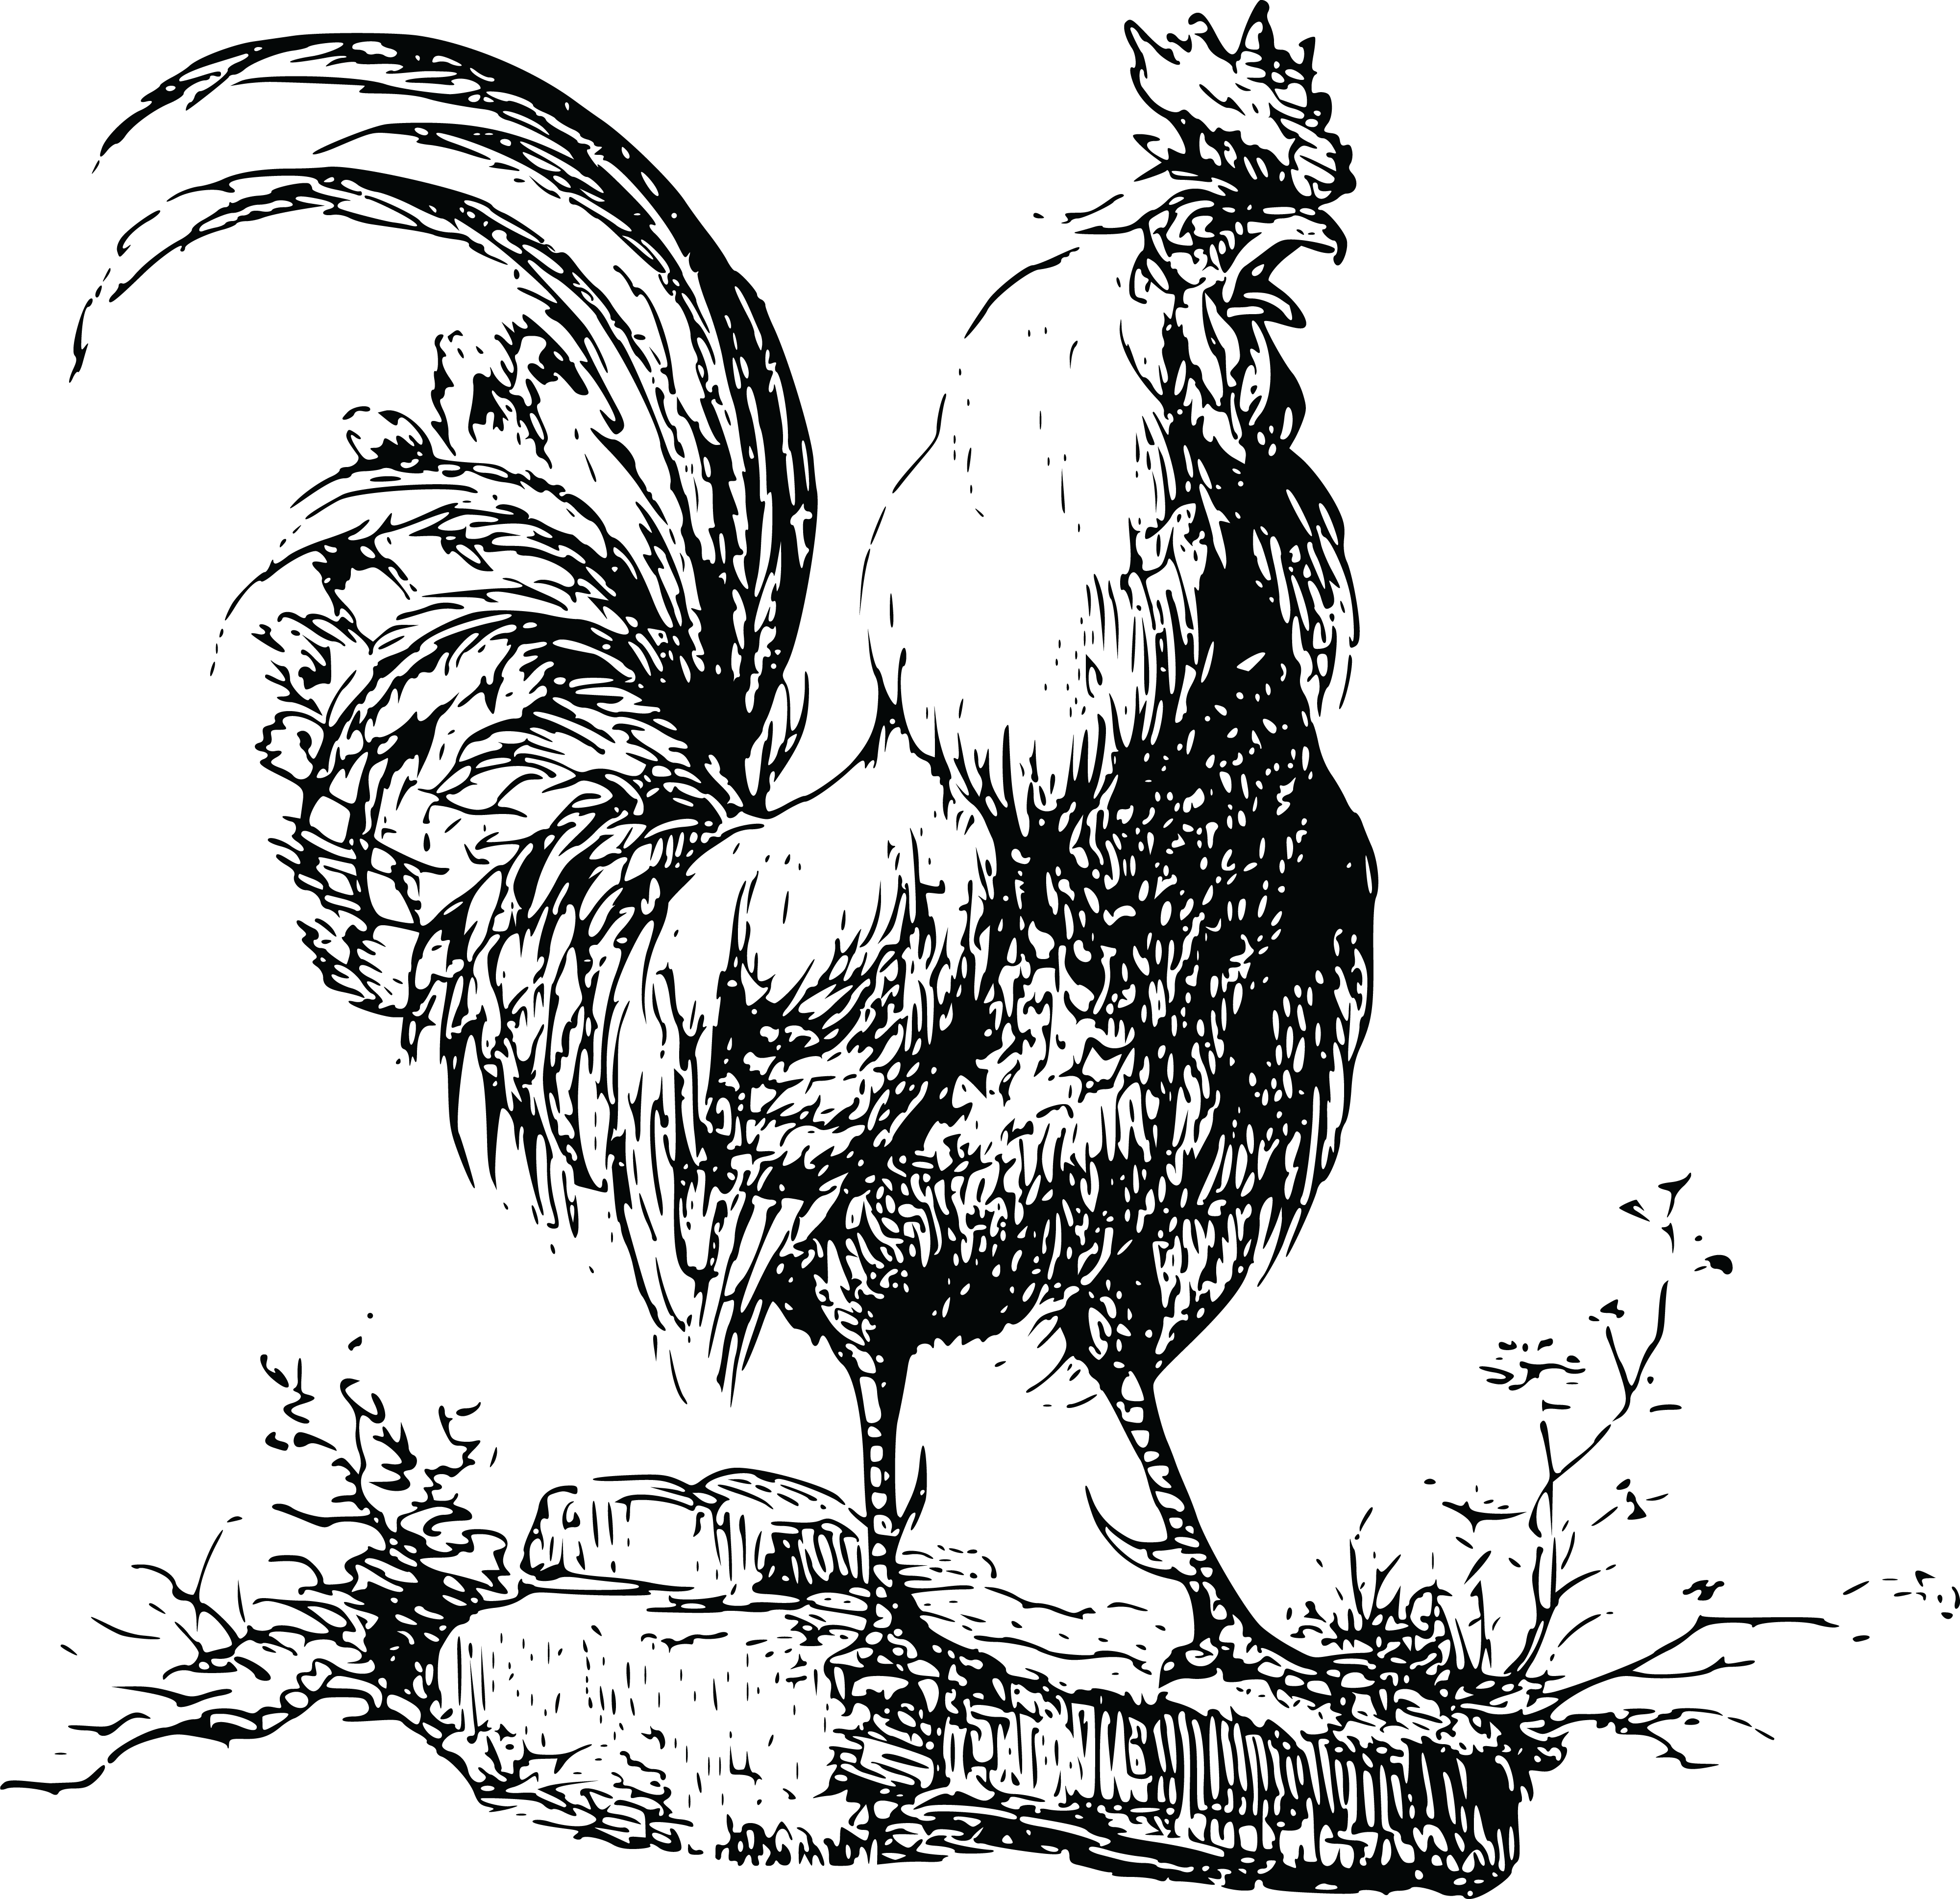 Free Clipart Of A rooster